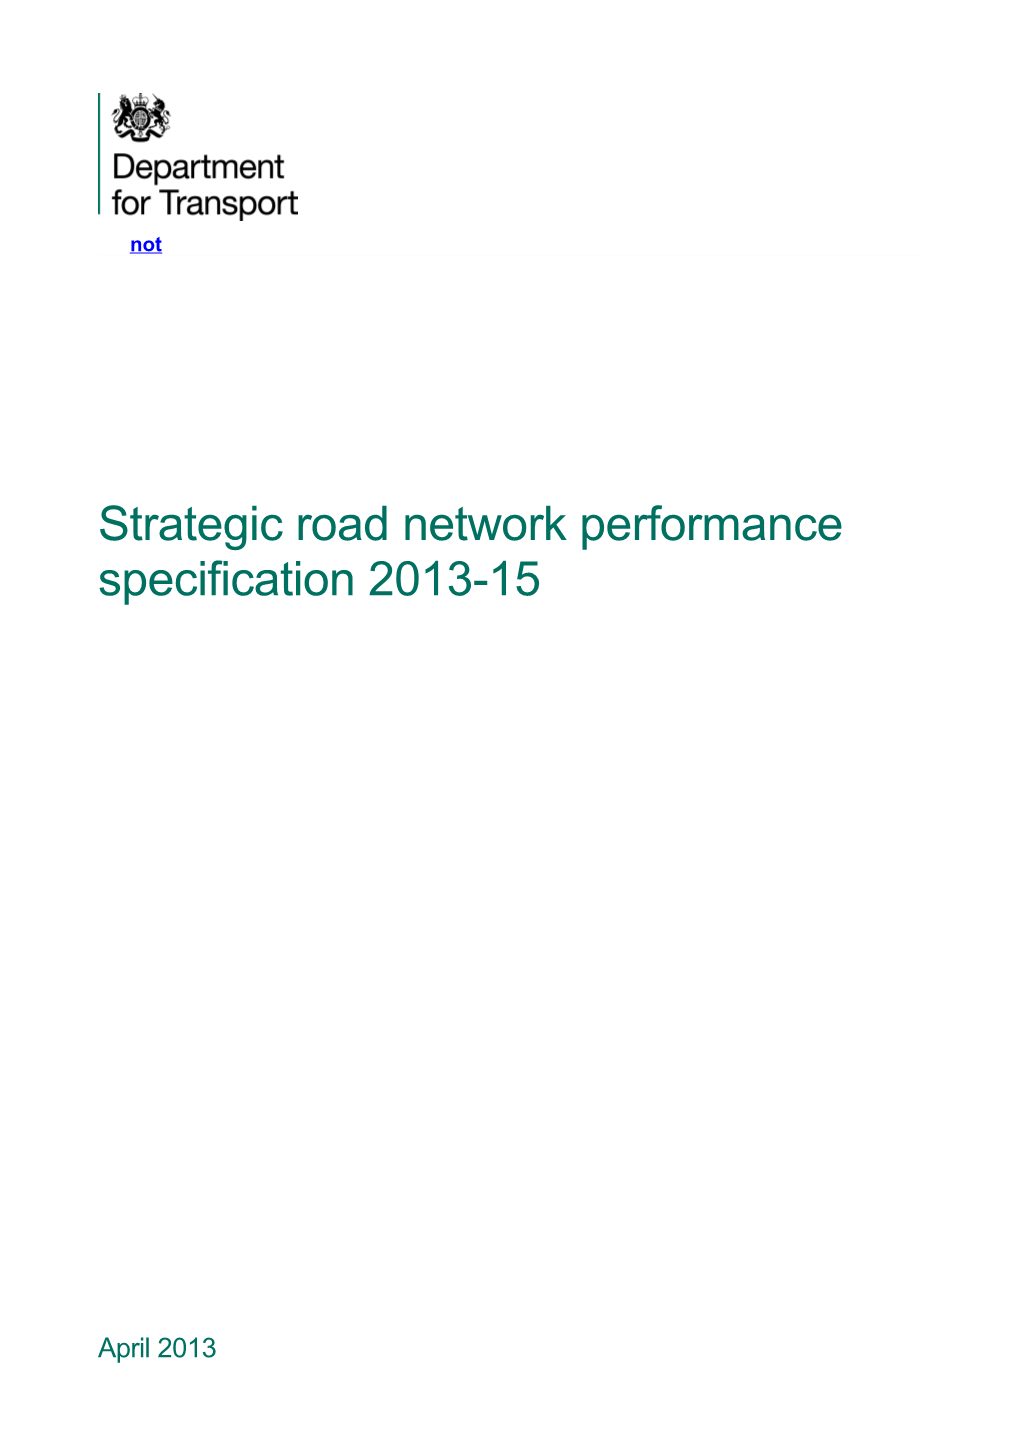 Strategic Road Network Performance Specification 2013-15